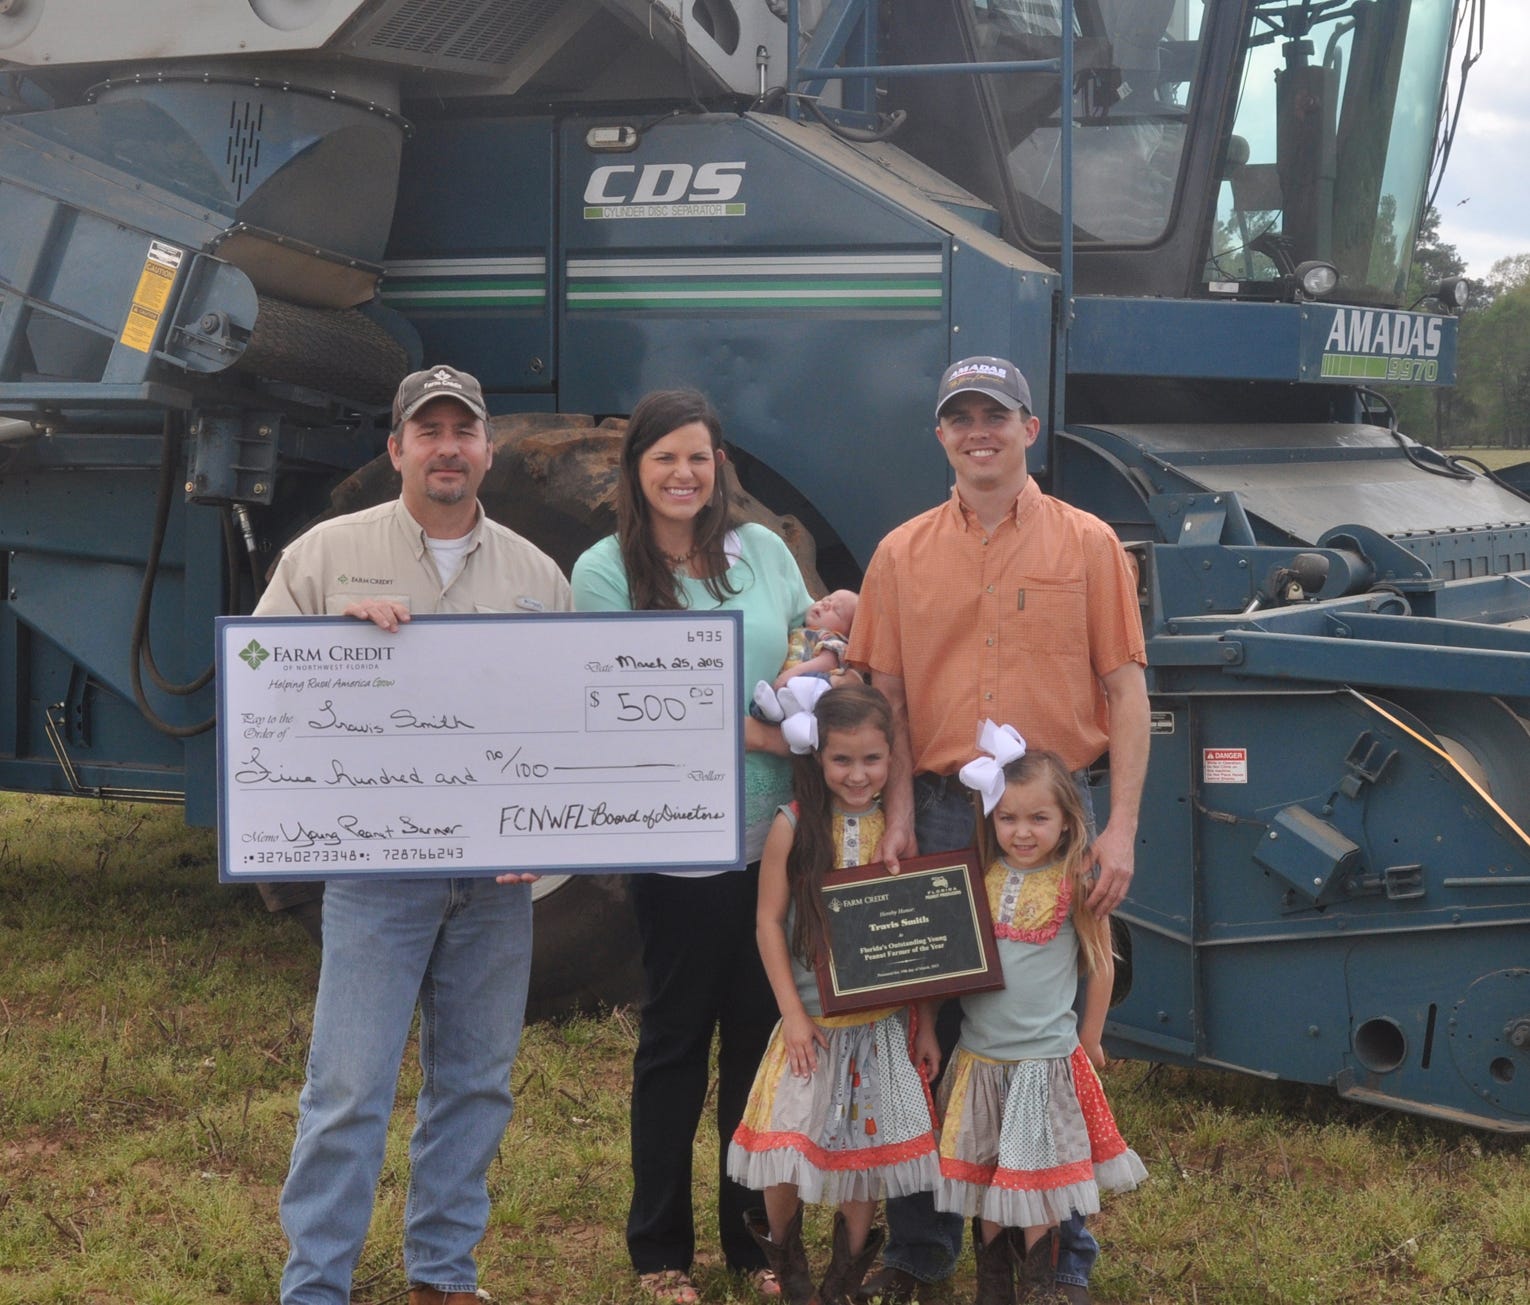 Travis Smith, right, is joined by his young family and Mike Digmon of Farm Credit of Northwest Florida. Smith, a native of Jay, was recently awarded by Farm Credit as ‘Florida’s Outstanding Young Farmer of the Year.’ Joining Smith in the center is his wife Brittany, holding their three-week old son Tate and their two daughters Leah, 6, and Lexie, 5.